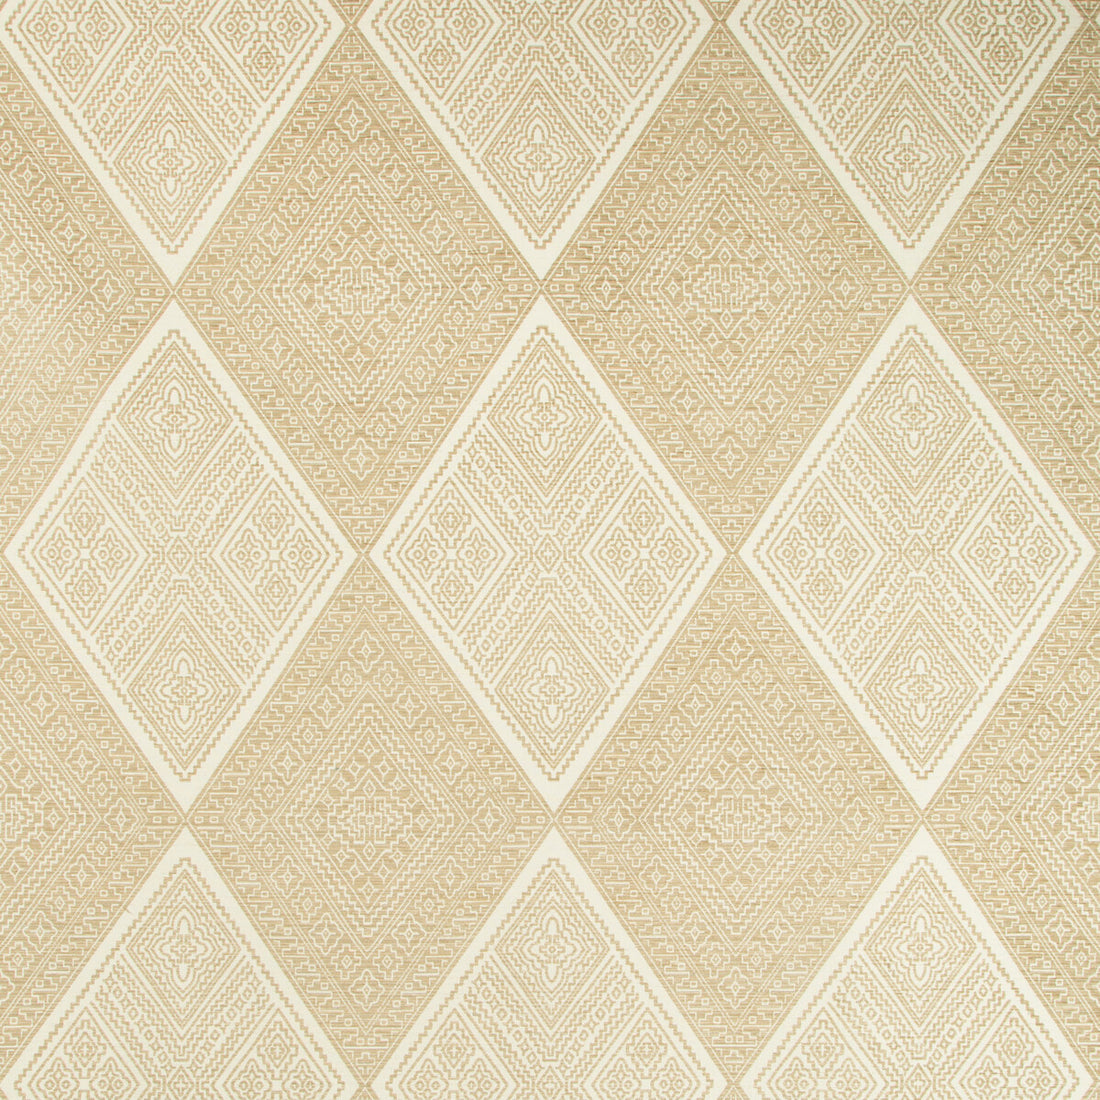 Kravet Design fabric in 35000-16 color - pattern 35000.16.0 - by Kravet Design in the Performance Crypton Home collection